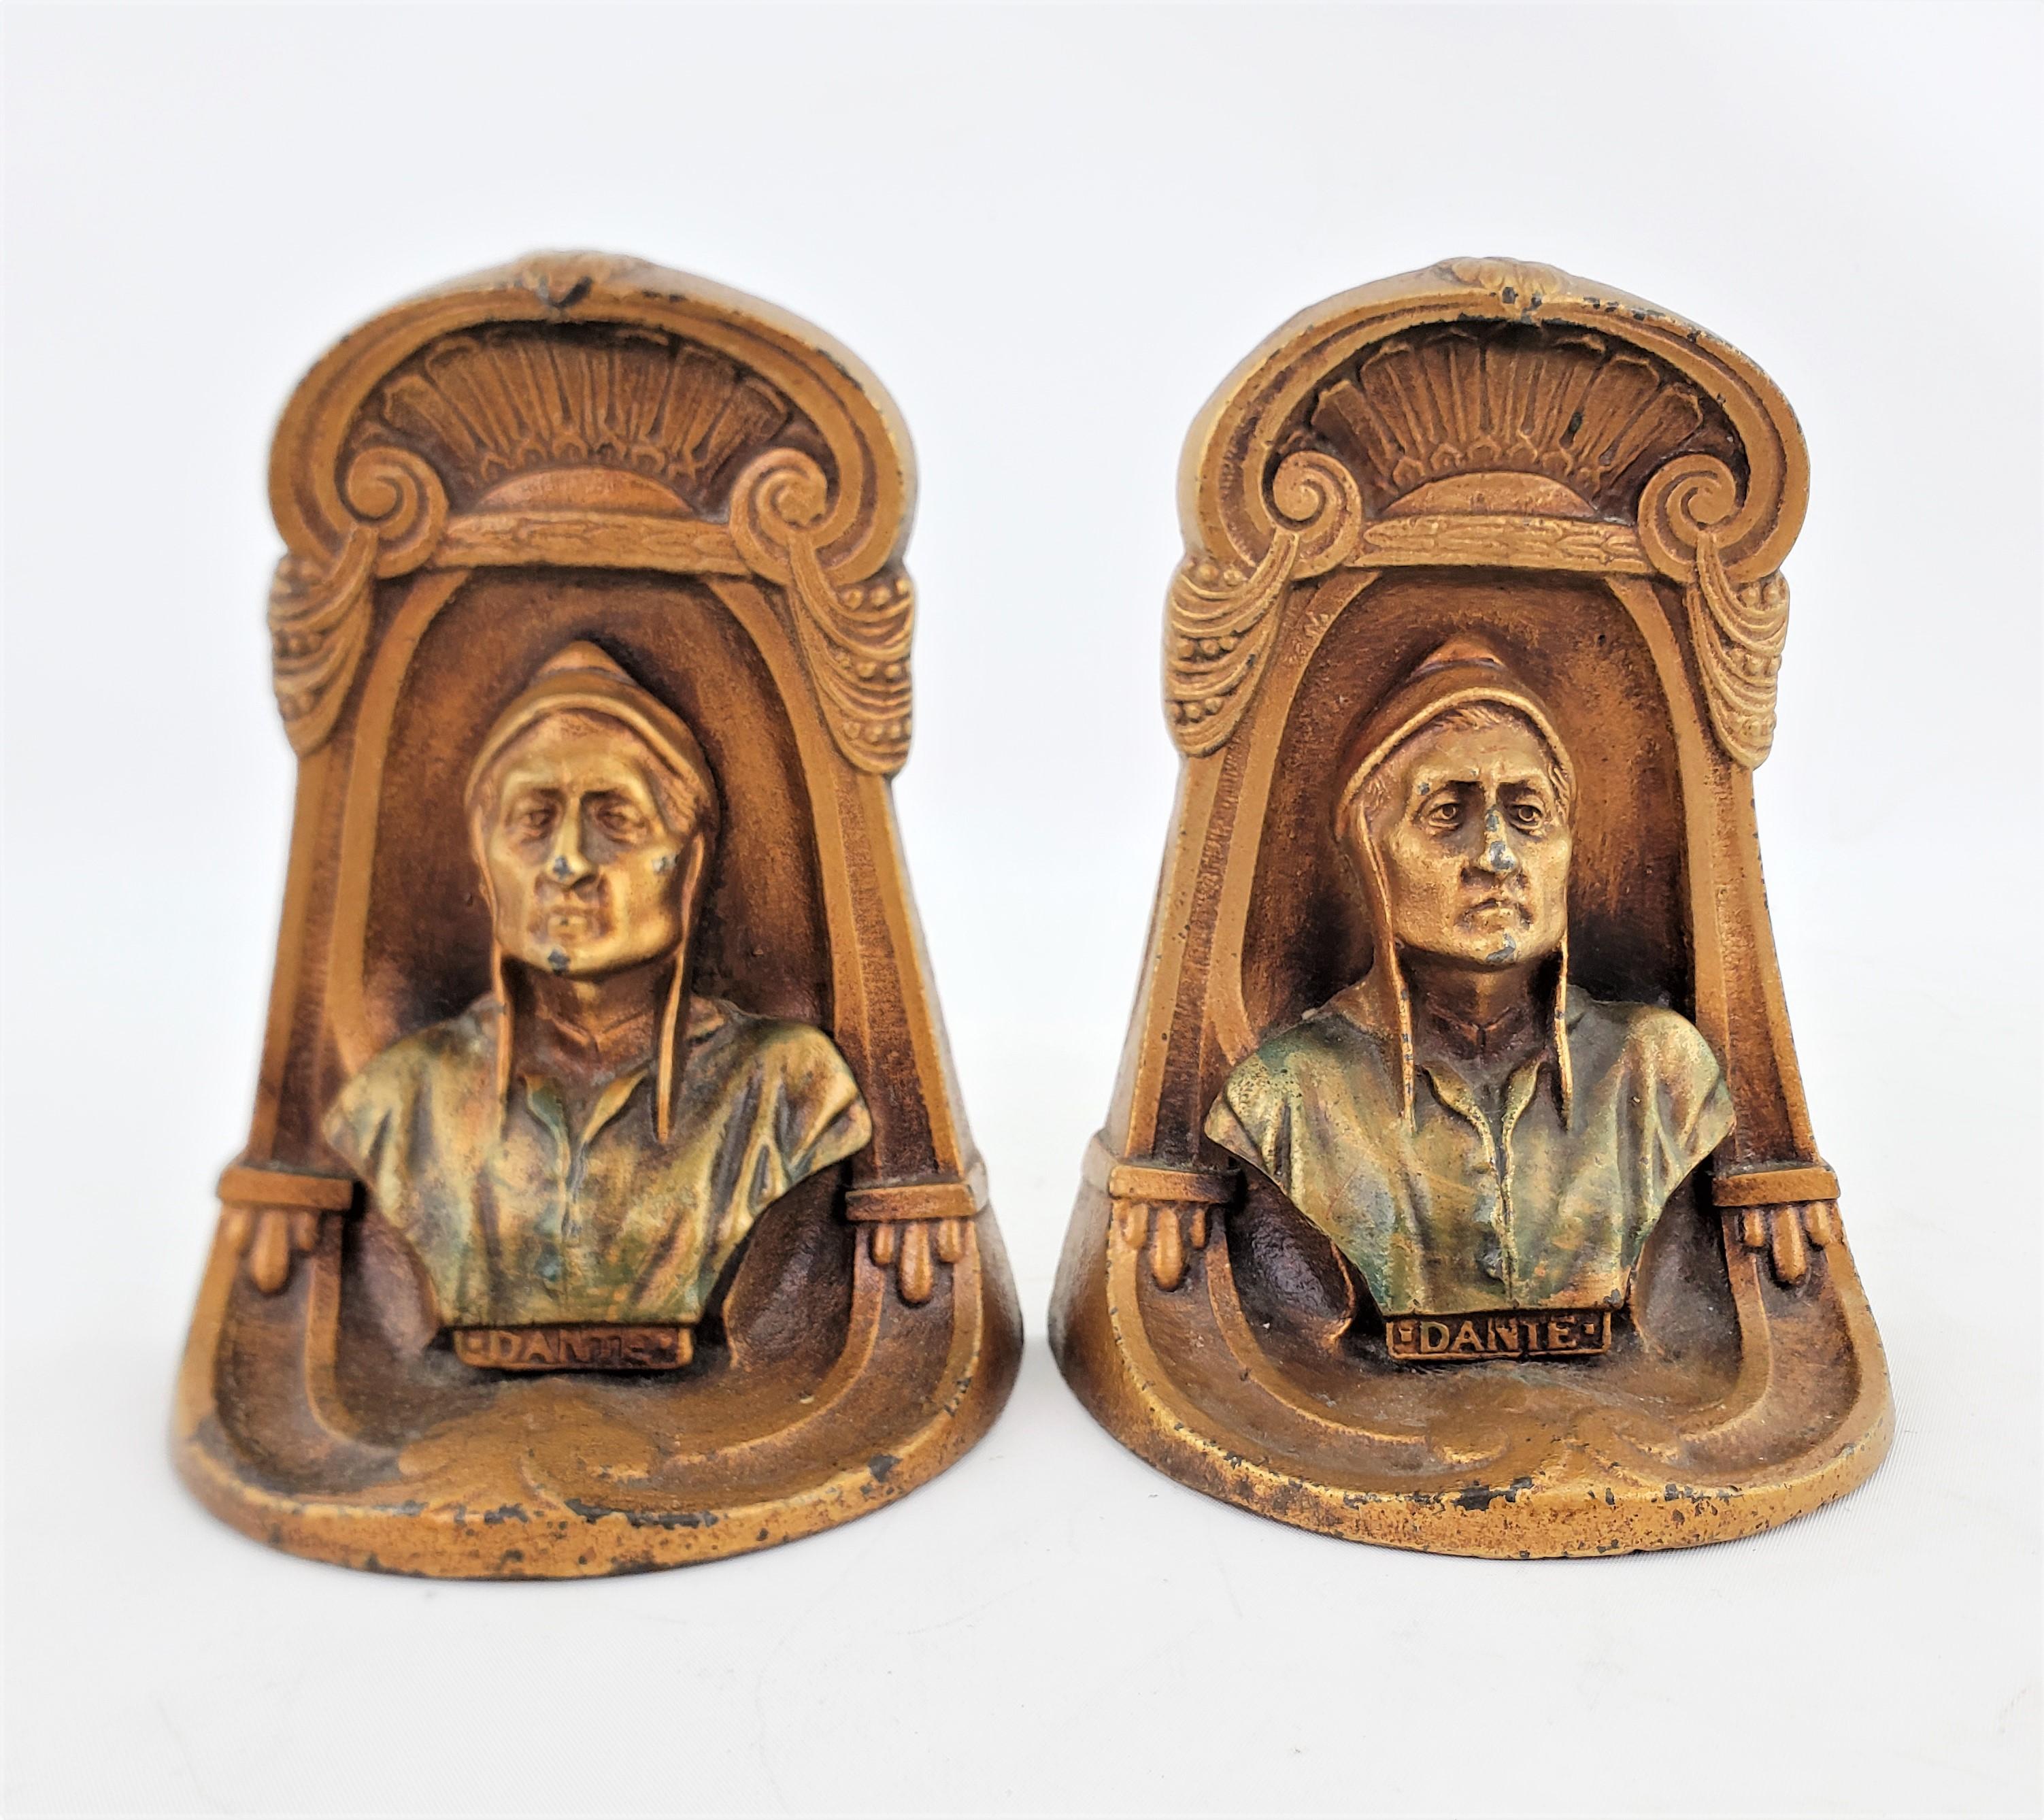 This pair of metal bookends are unsigned and show no foundry marks, but are presumed to have been made in England in approximately 1920 in the period Art Deco style. The bookends are composed of cast metal, featuring a relief of Dante on the front